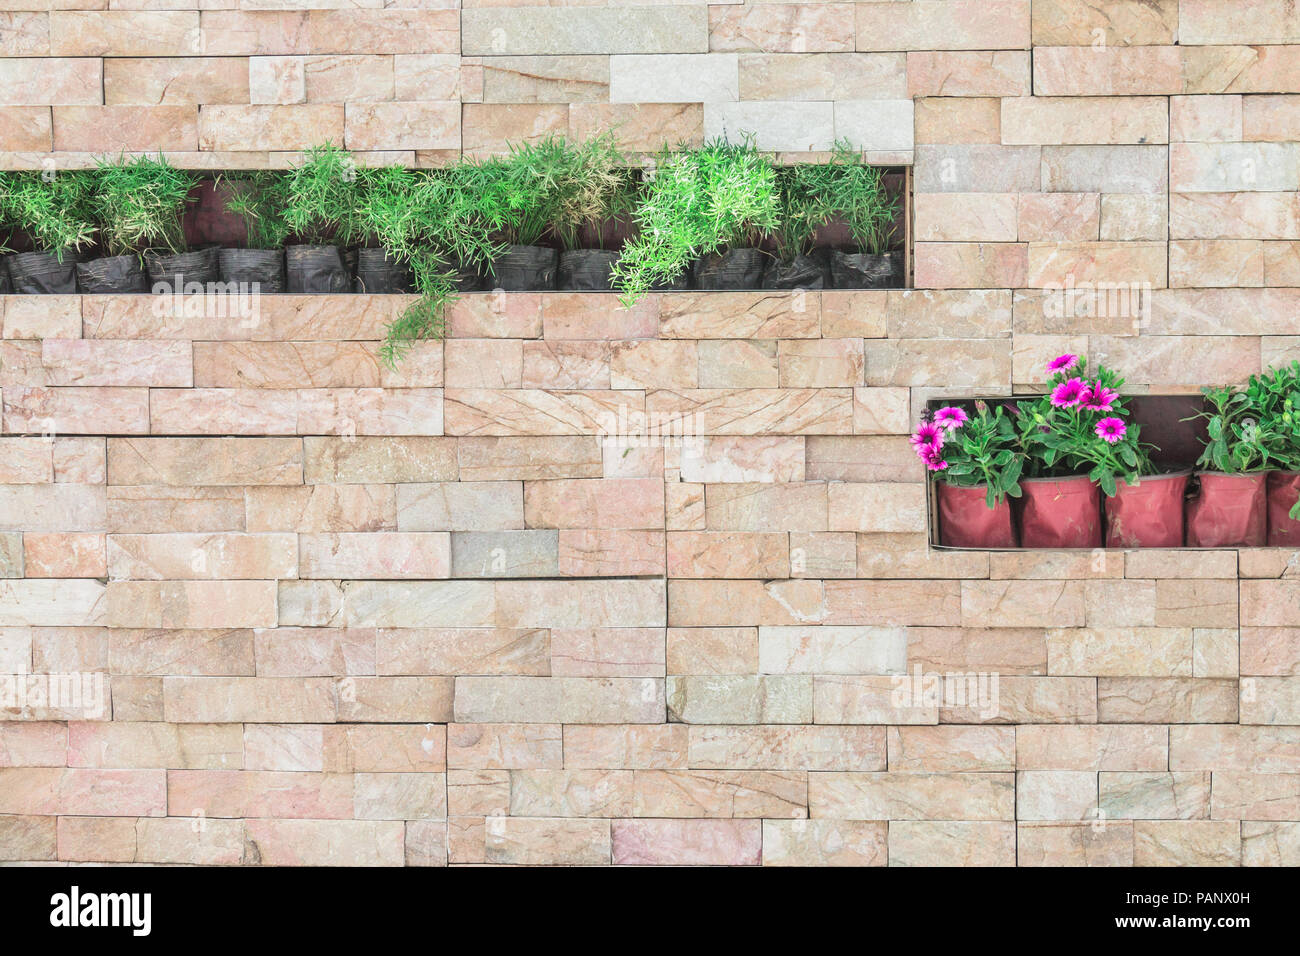 Potted plant on stone wall Stock Photo